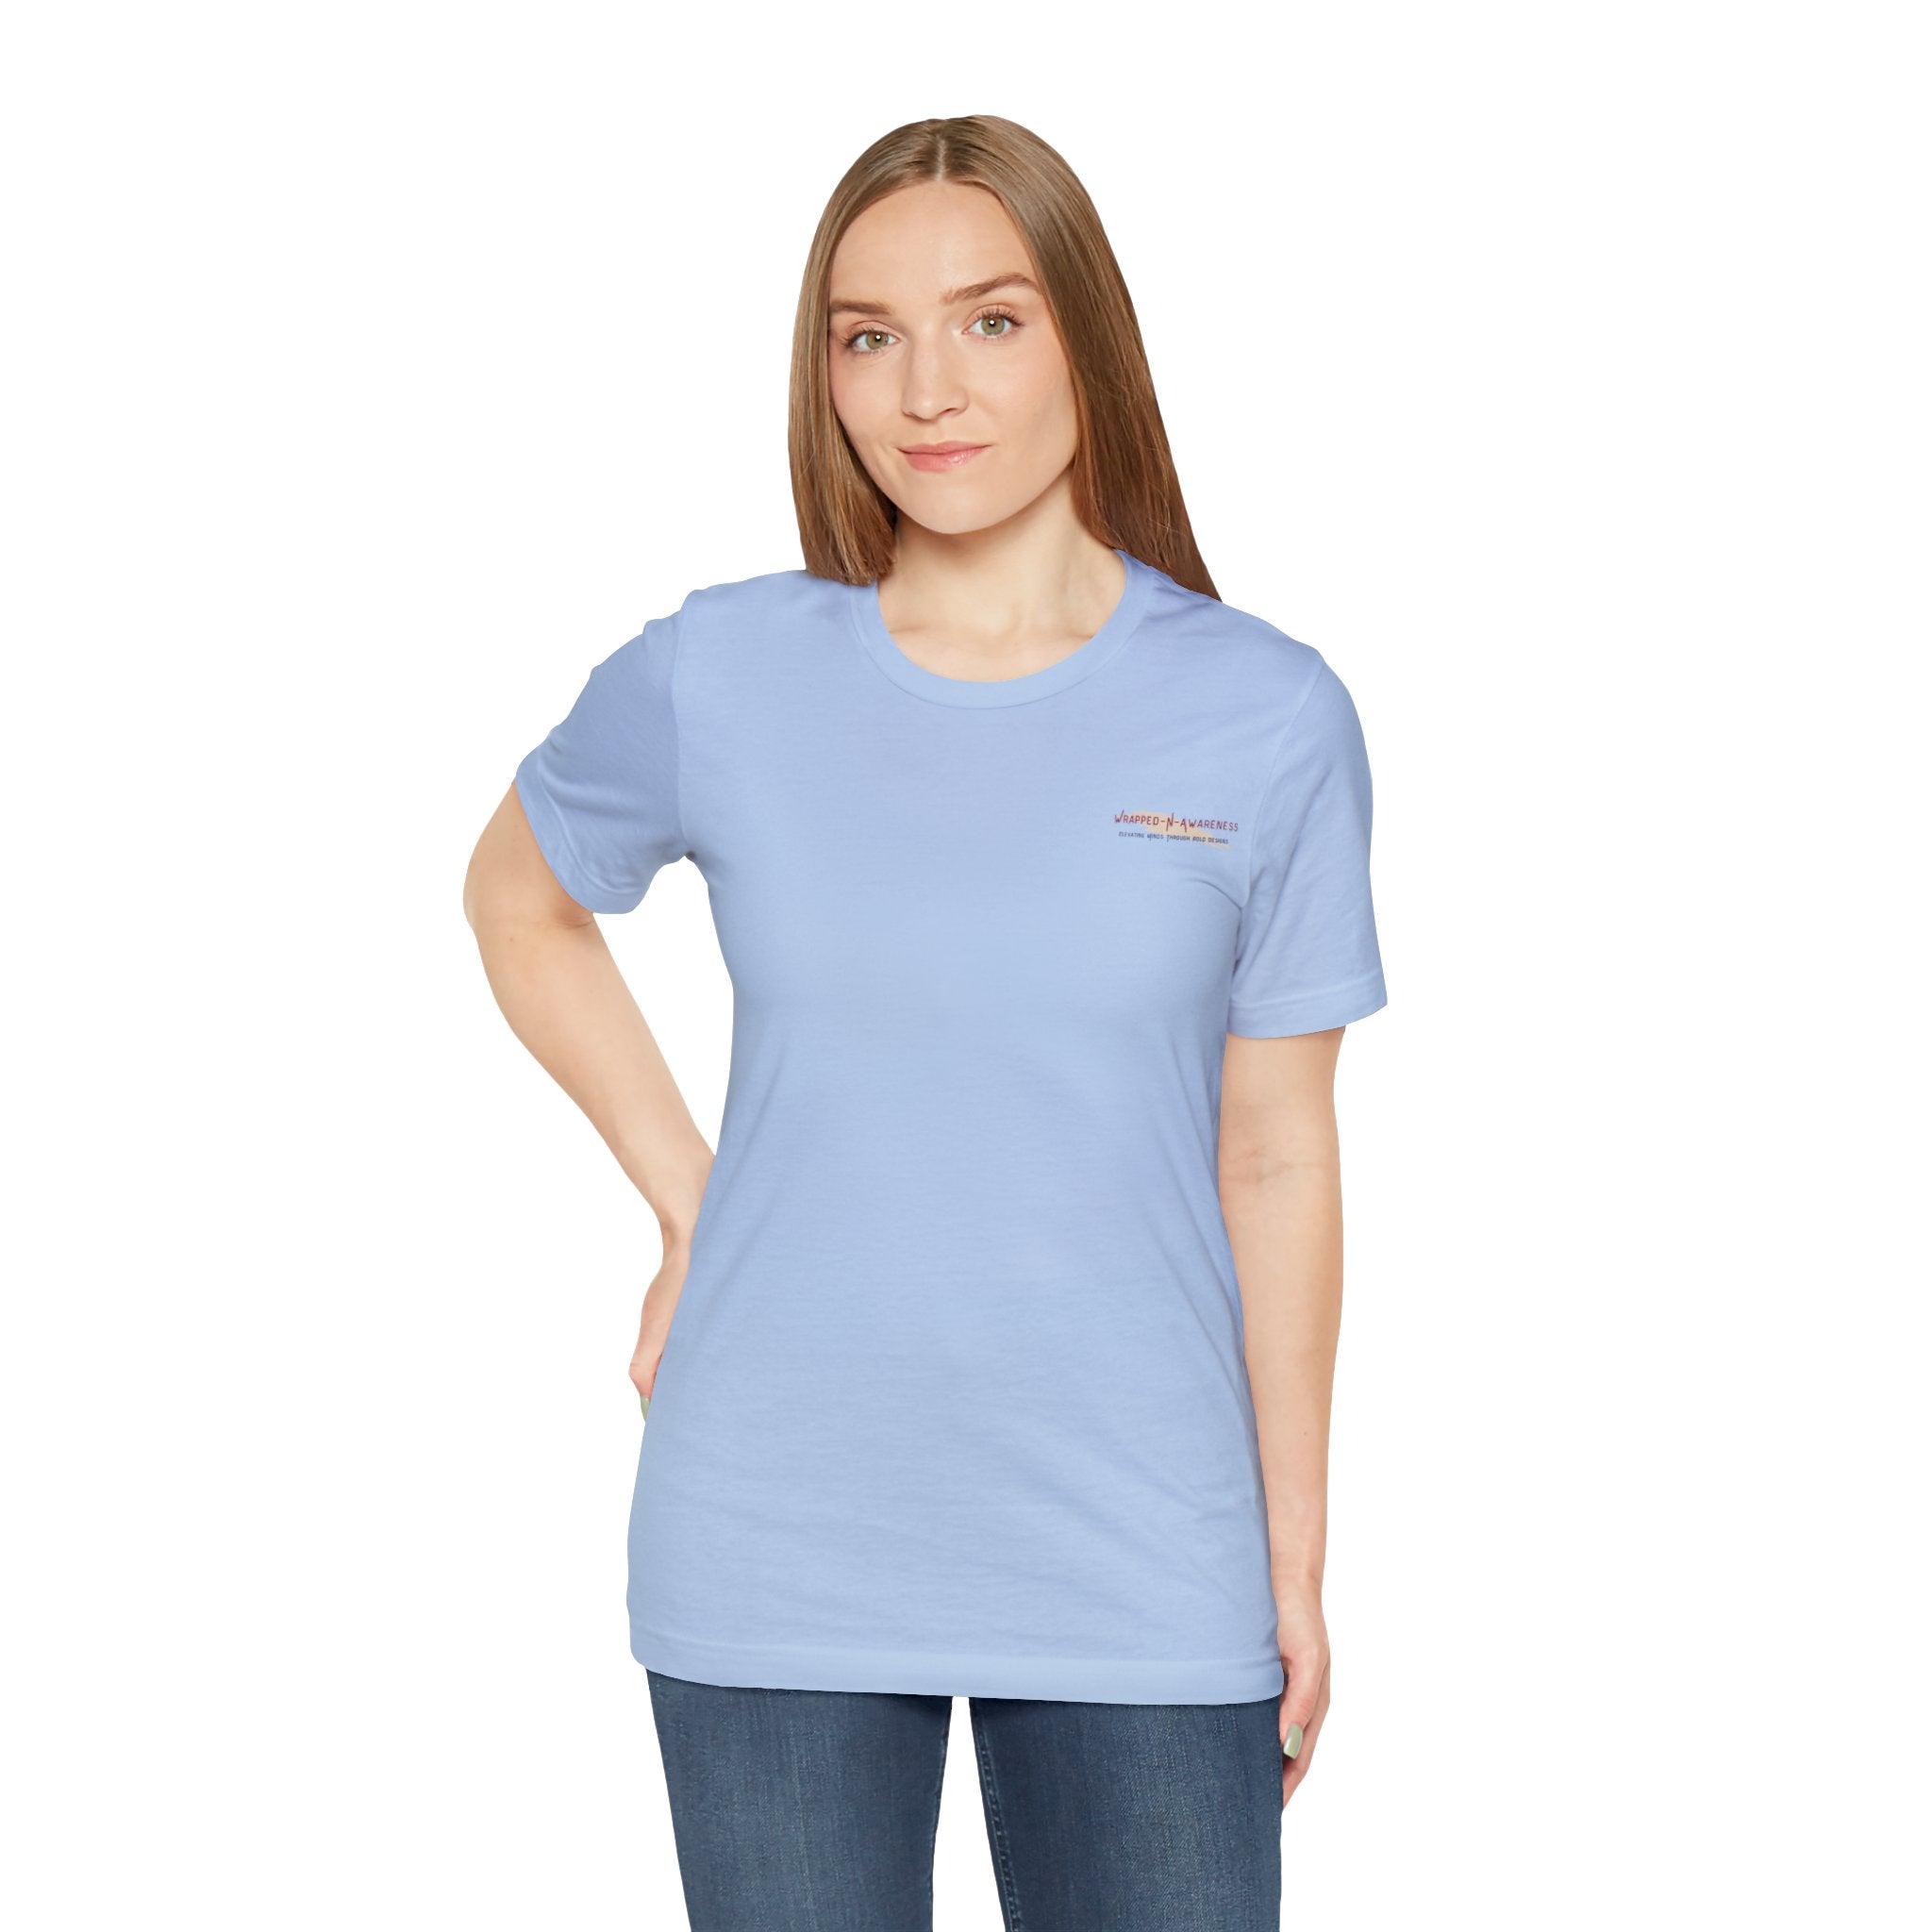 Hope Conquers Fear Jersey Tee - Bella+Canvas 3001 Heather Ice Blue Airlume Cotton Bella+Canvas 3001 Crew Neckline Jersey Short Sleeve Lightweight Fabric Mental Health Support Retail Fit Tear-away Label Tee Unisex Tee T-Shirt 16036653941556693415_2048 Printify